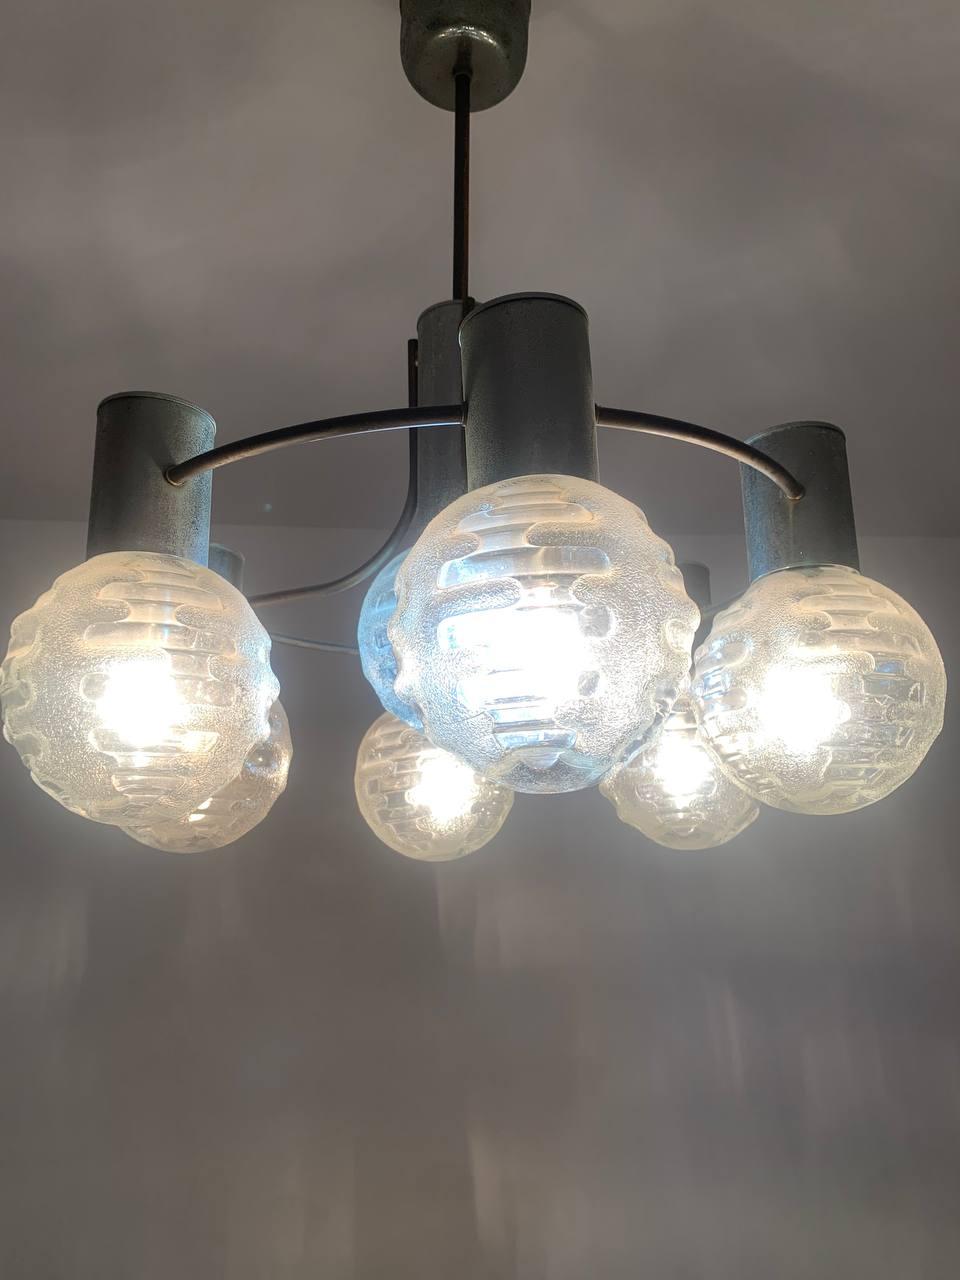 Sputnik chandelier by Richard Essig.
 Space-age pendant lamp,
 Atomic Age lamp, designer lamp, vintage orbital ceiling light, made in Germany 1970s.
Good condition found with some temporal wear in the brass.
In working order 